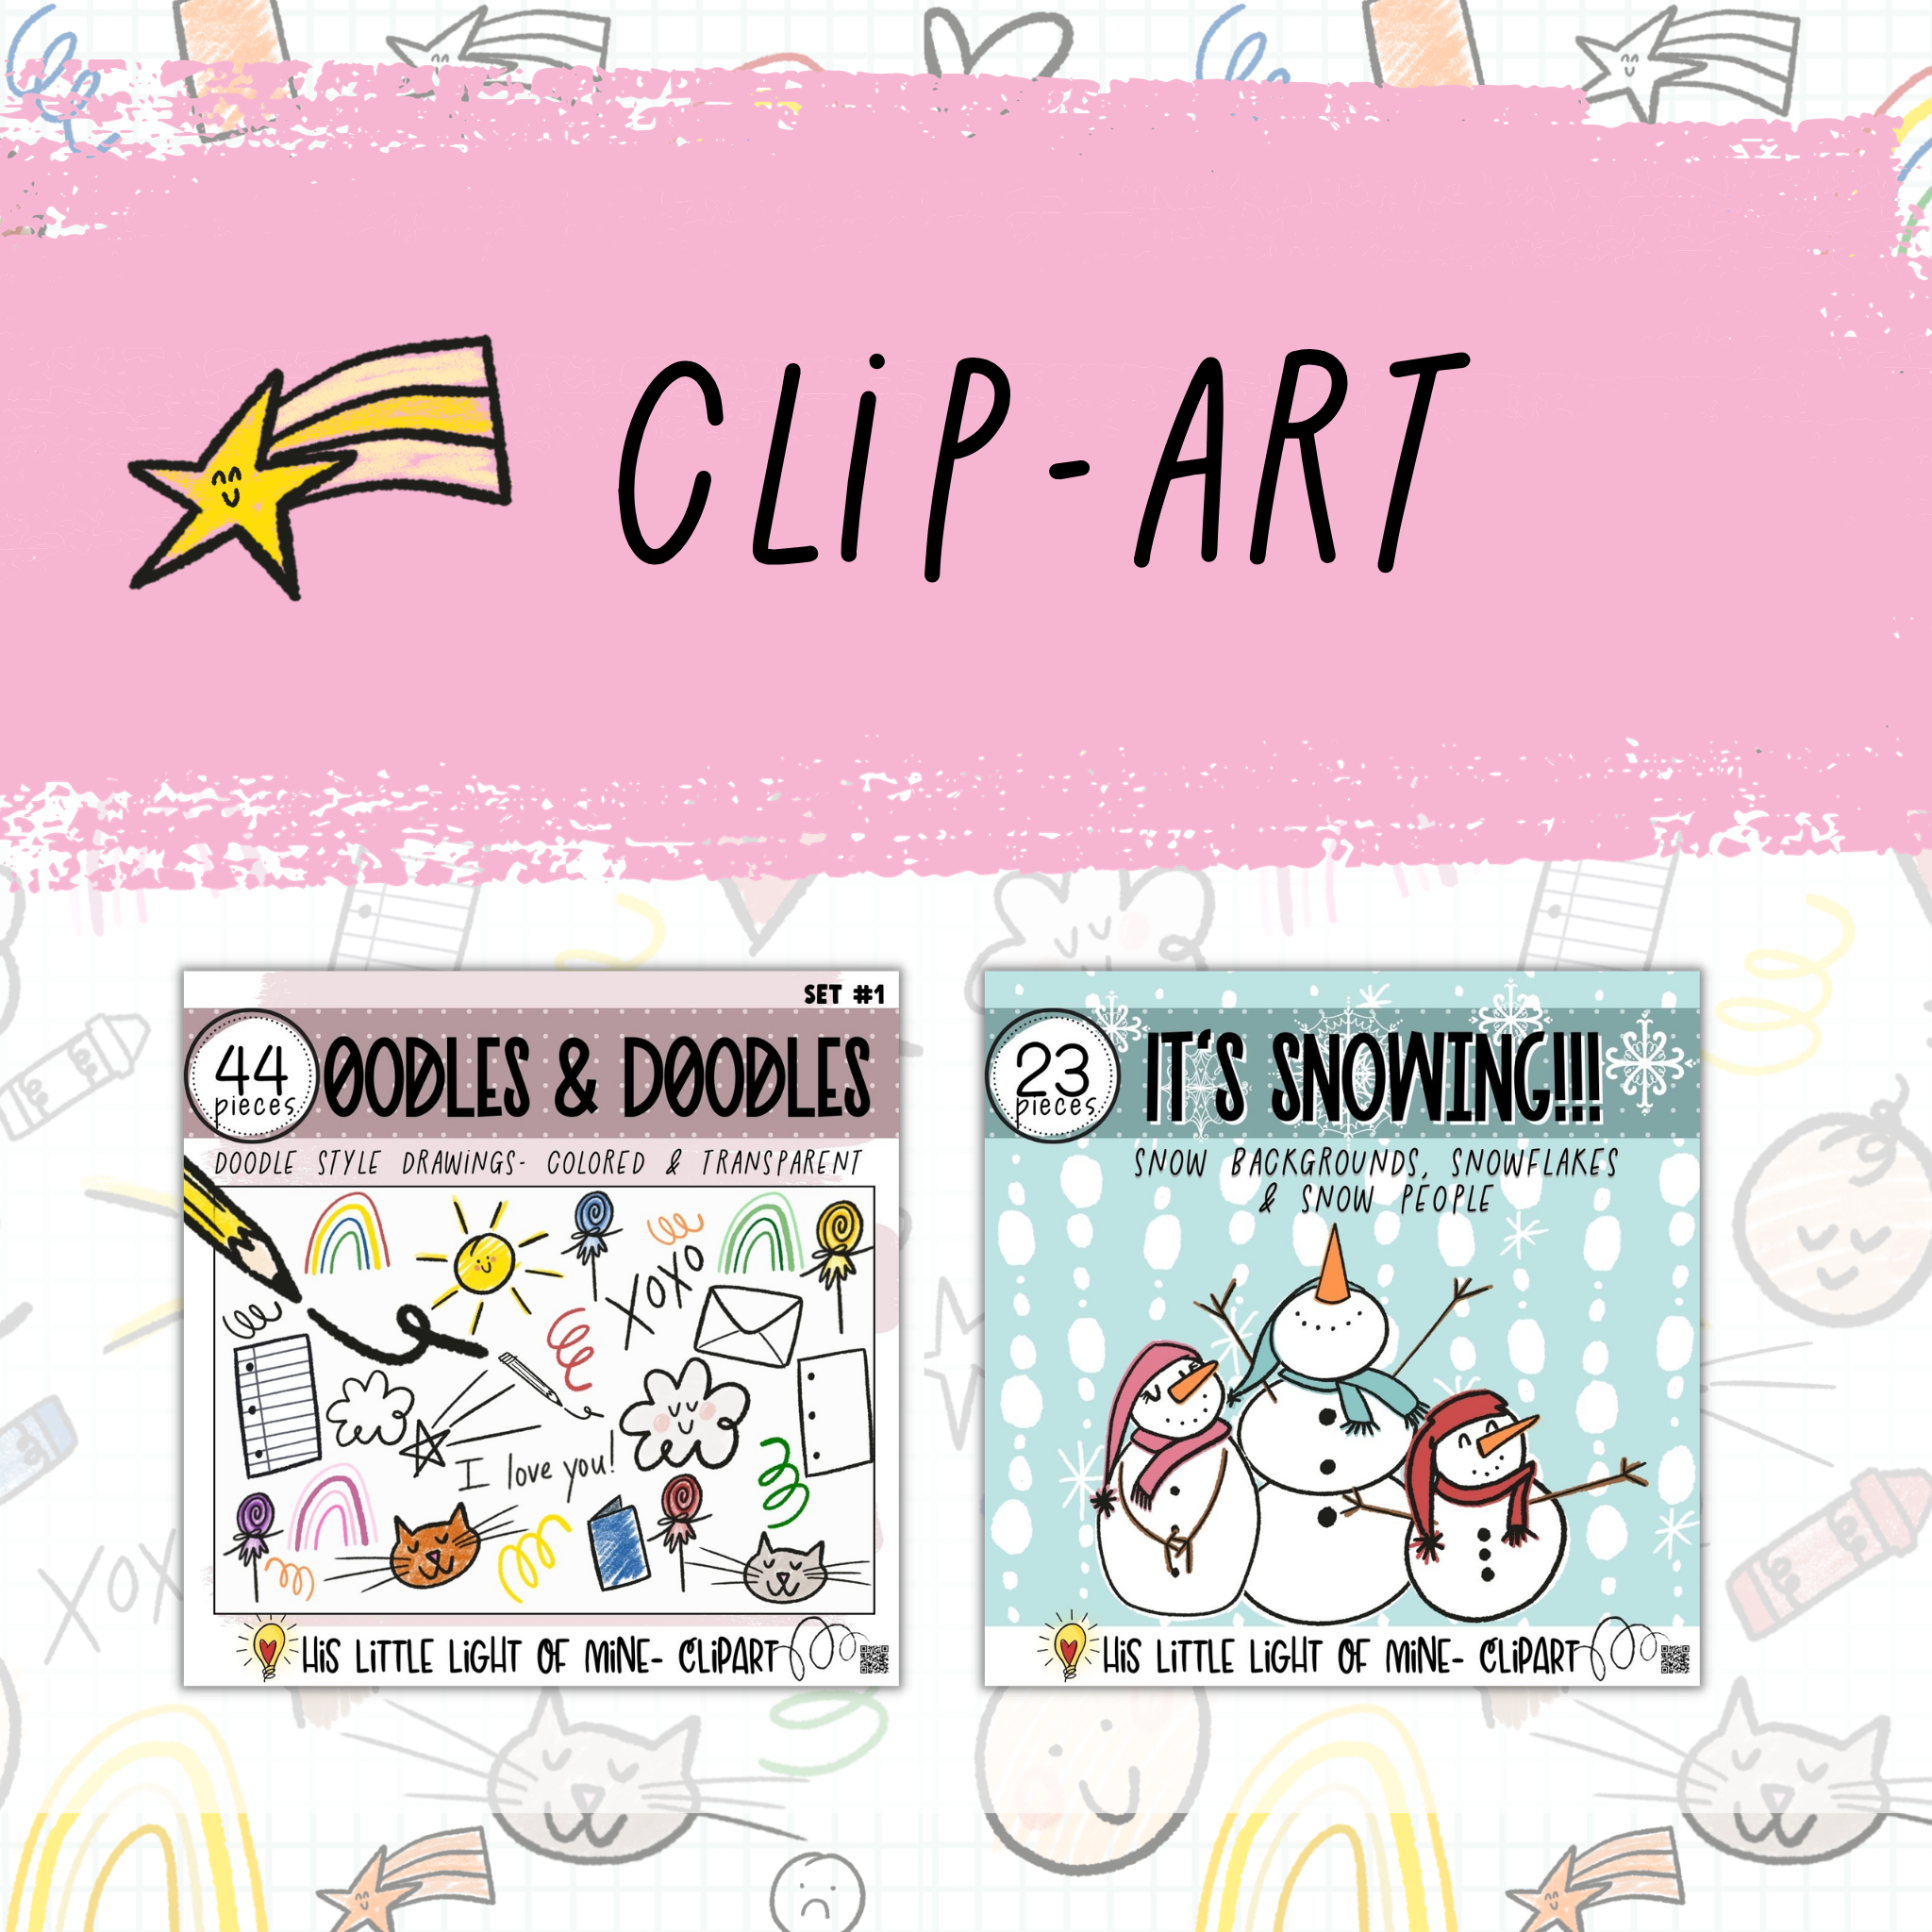 o	Button representing clip art sets or packs created by self published author and illustrator Lindsay Dain who has most of her self published products on Kindle Direct Publishing’s platform.